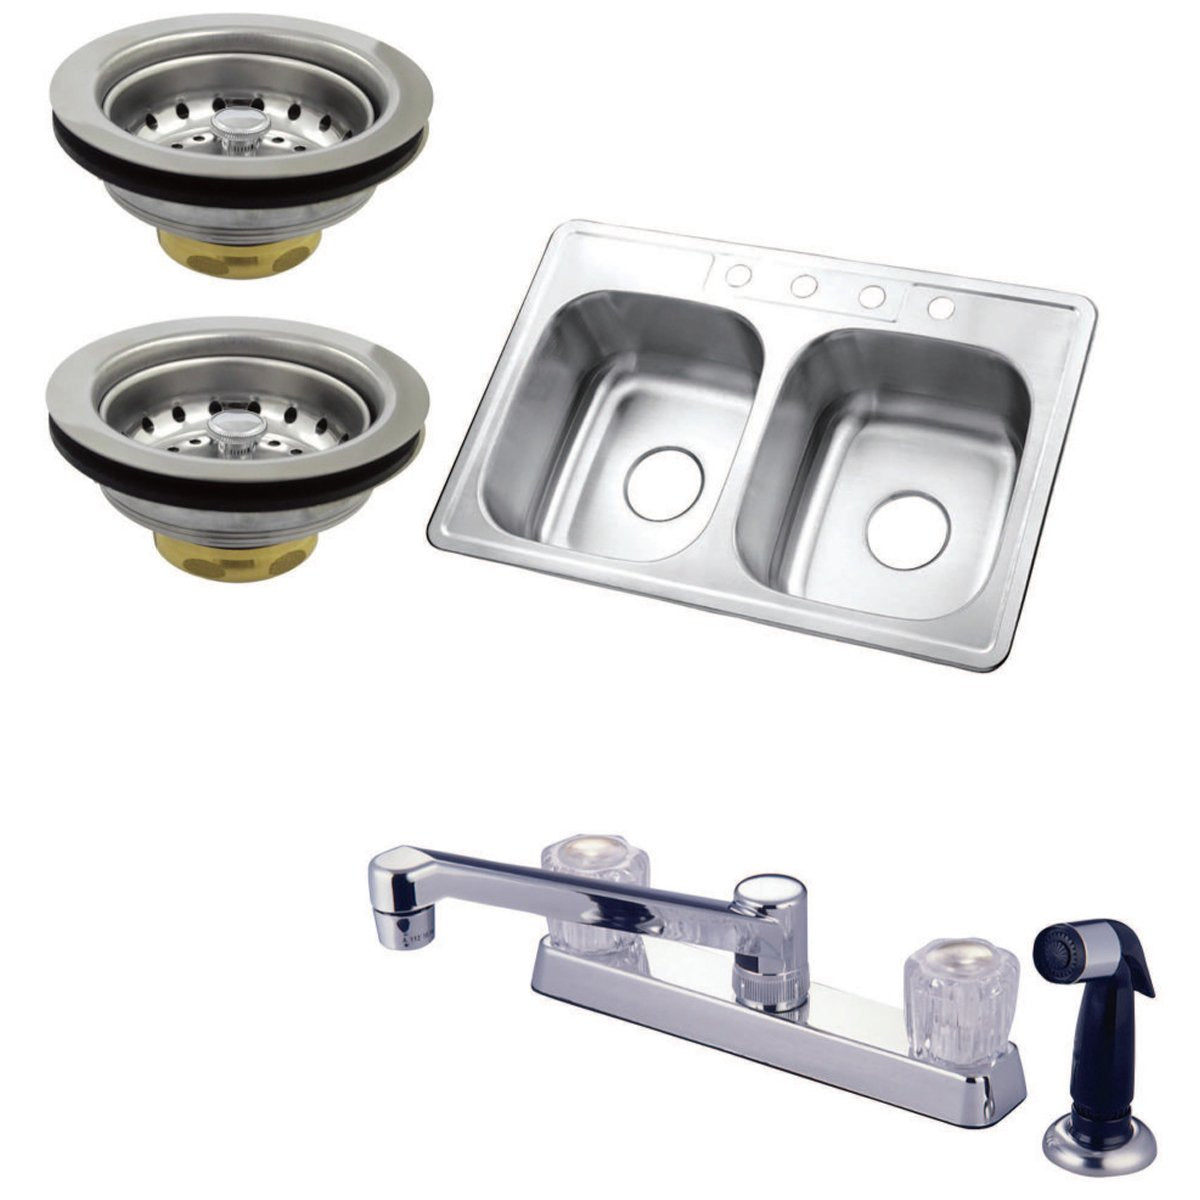 Kingston Brass Self-Rimming Double Bowl Kitchen Sink with Faucet